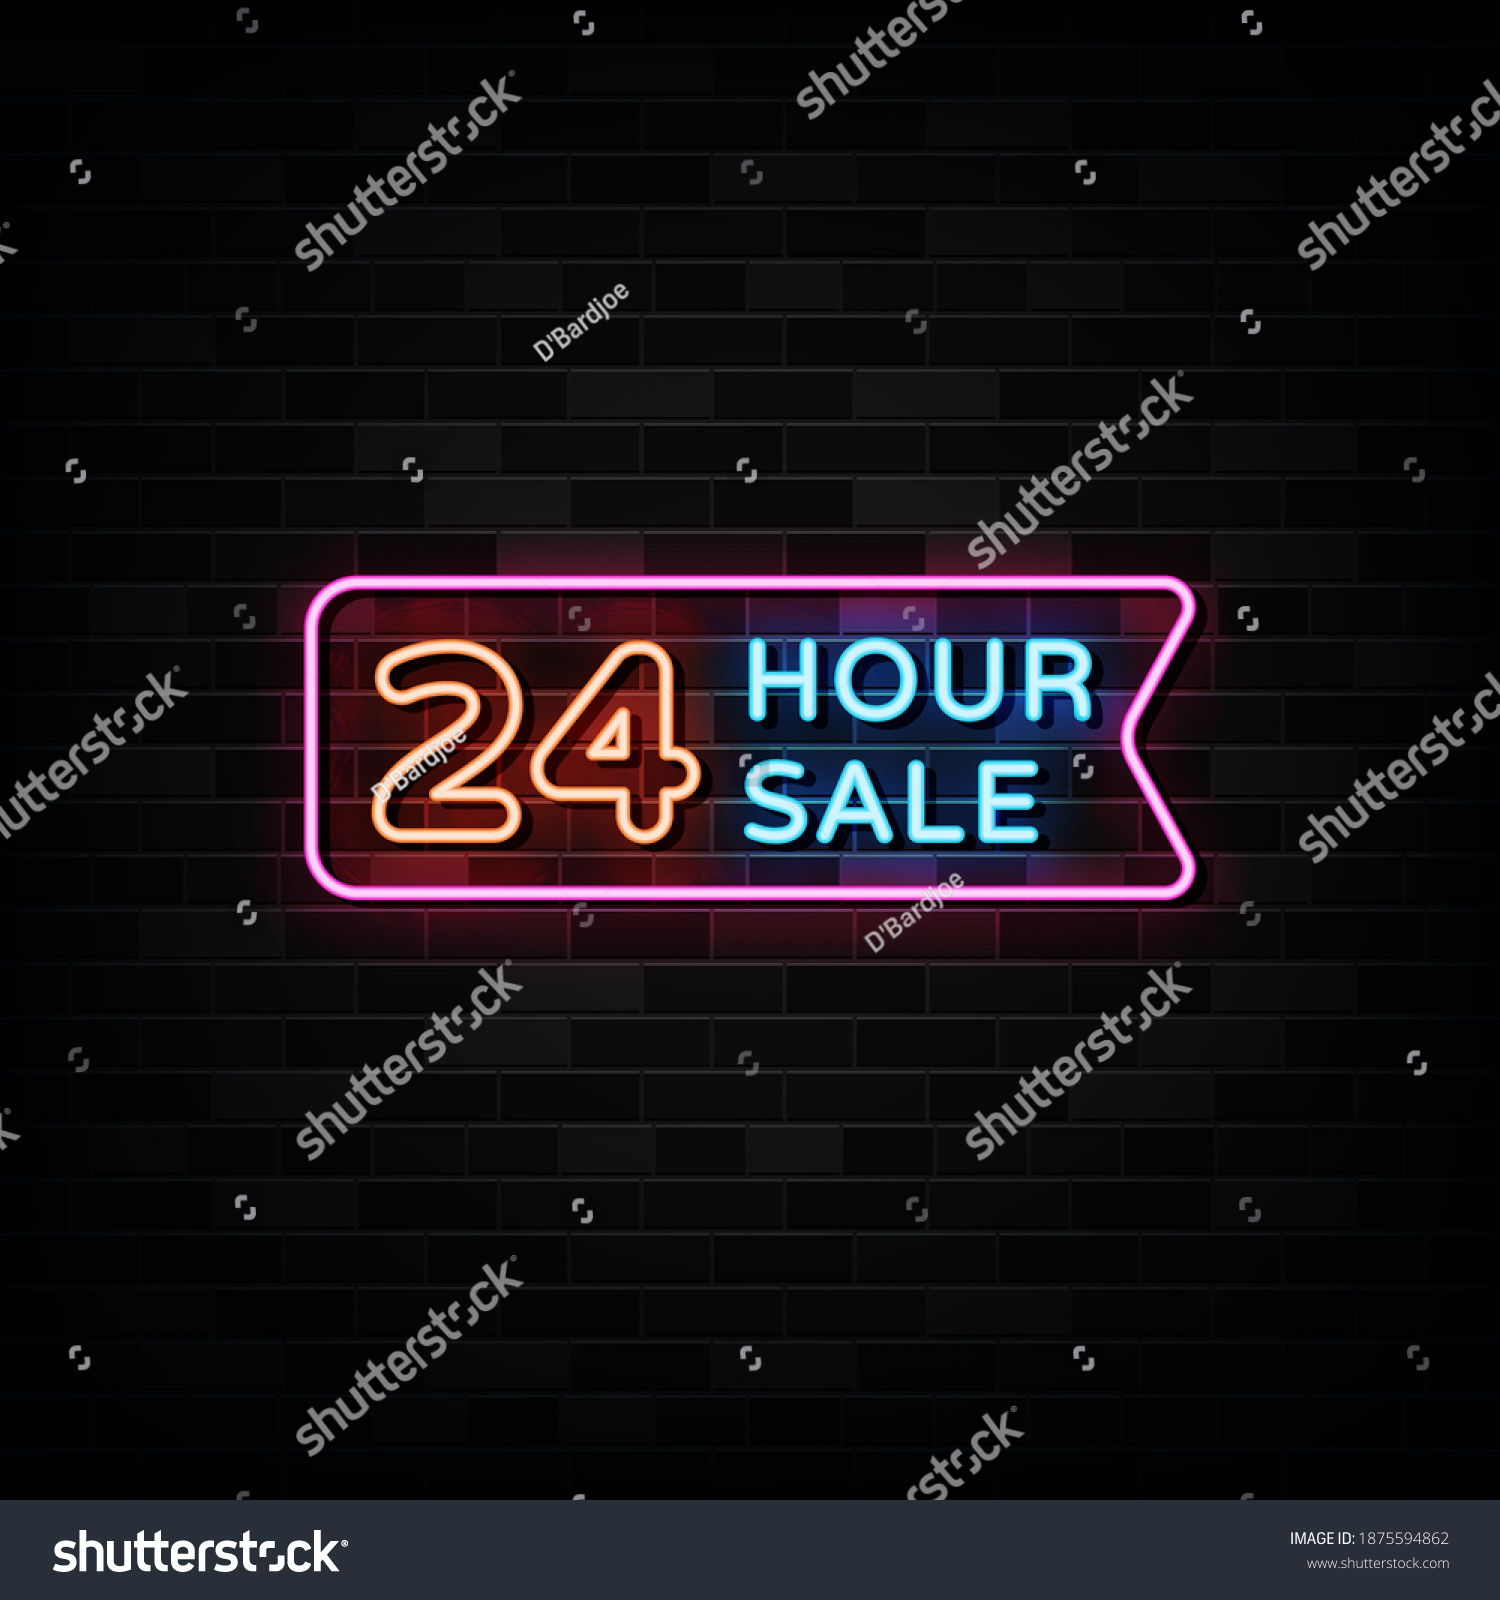 SVG of 24 Hour Sale Neon Signs Vector. Design Template Neon Style svg